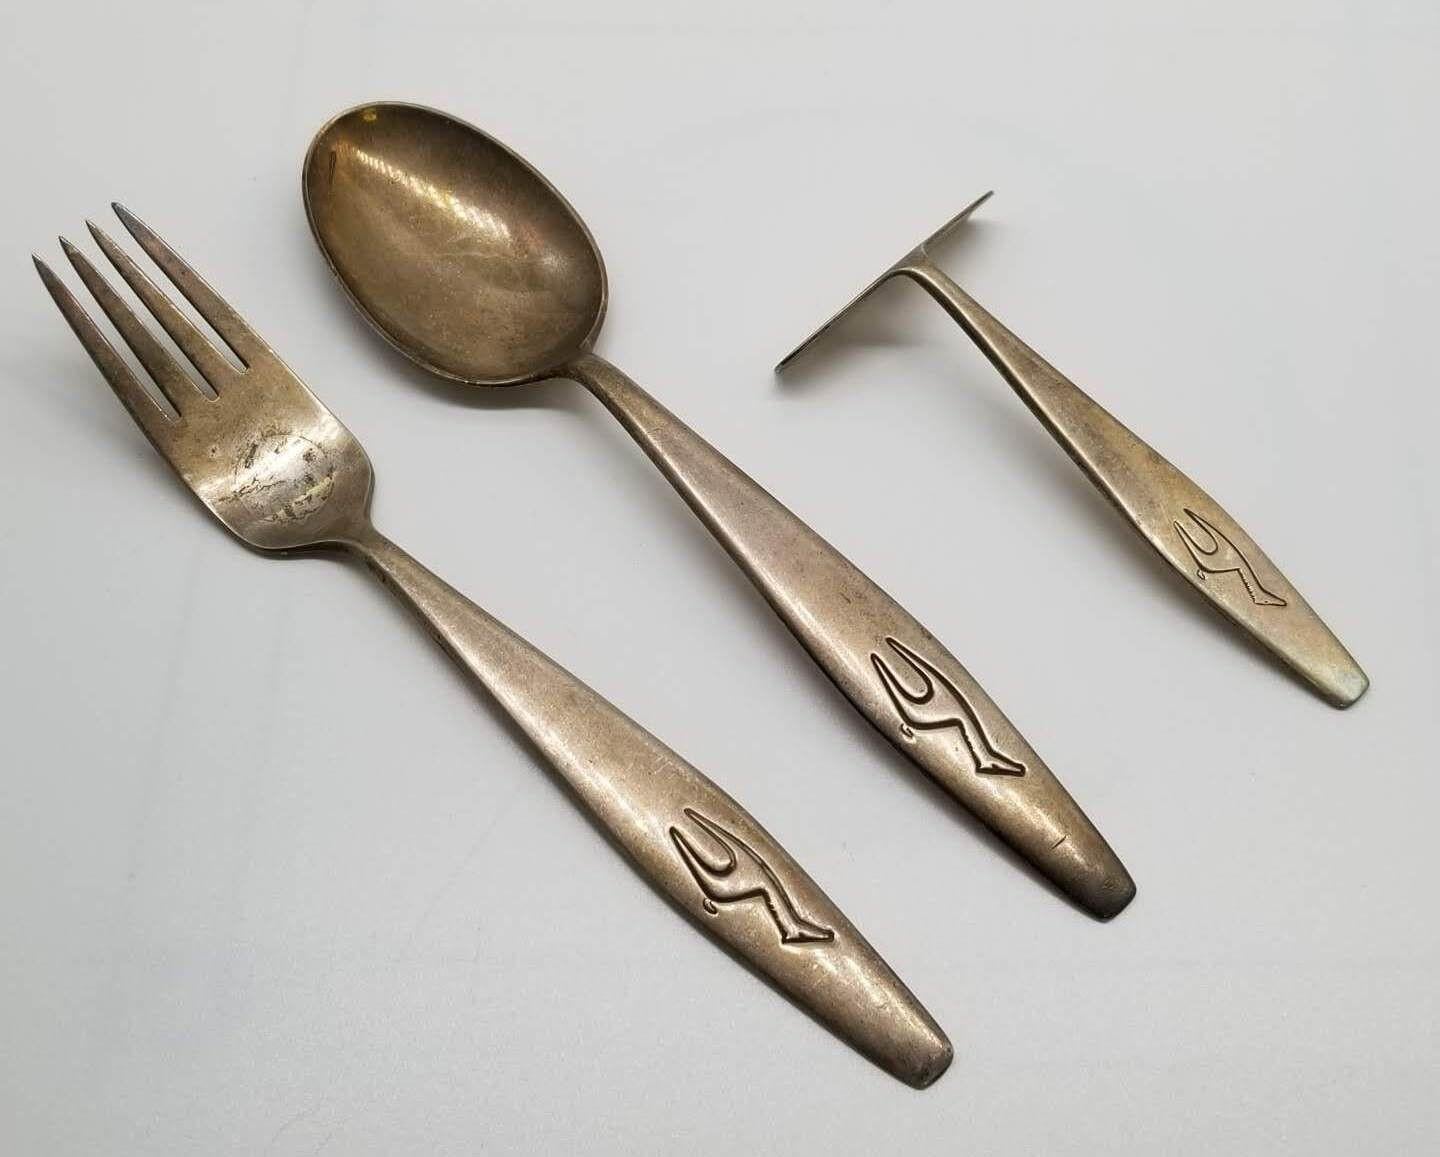 Antique Kids Set of 3, Silverware 830S by Mylius, Norway -1900s For Sale 2